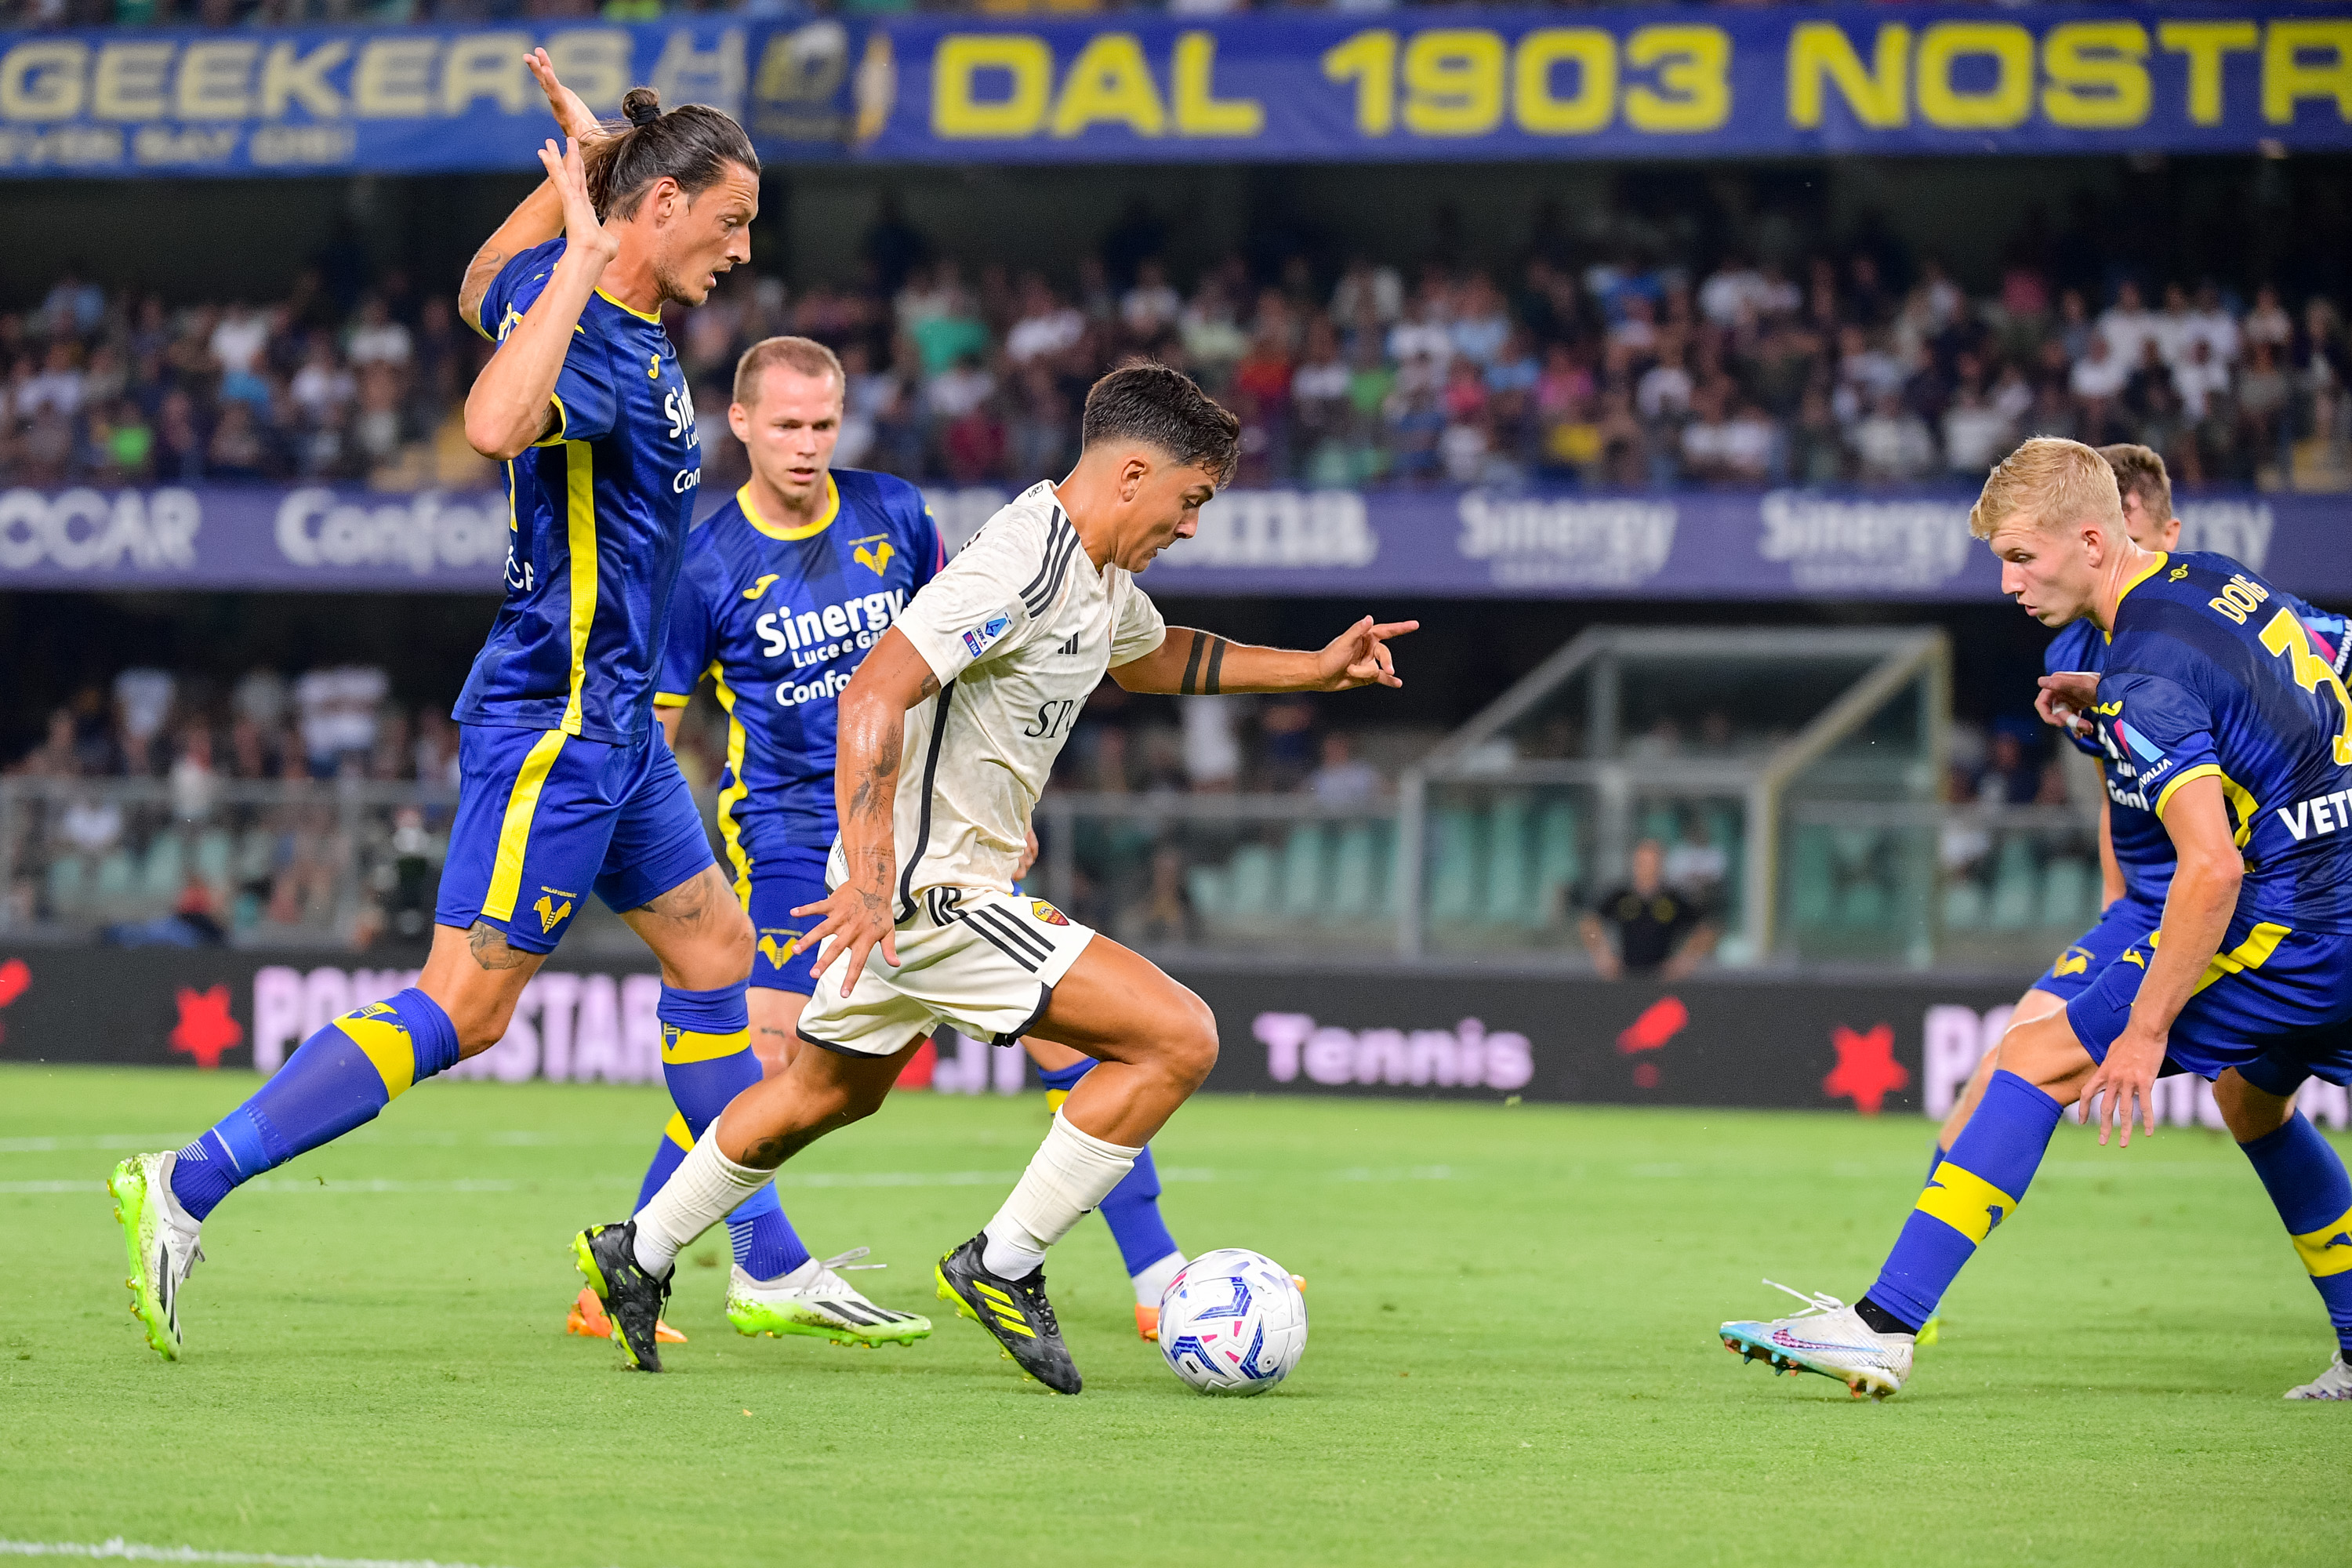 VERONA, ITALY - AUGUST 26: Paulo Dybala of AS Roma in action during the Serie A TIM match between Hellas Verona FC and AS Roma at Stadio Marcantonio Bentegodi on August 26, 2023 in Verona, Italy. (Photo by Fabio Rossi/AS Roma via Getty Images)